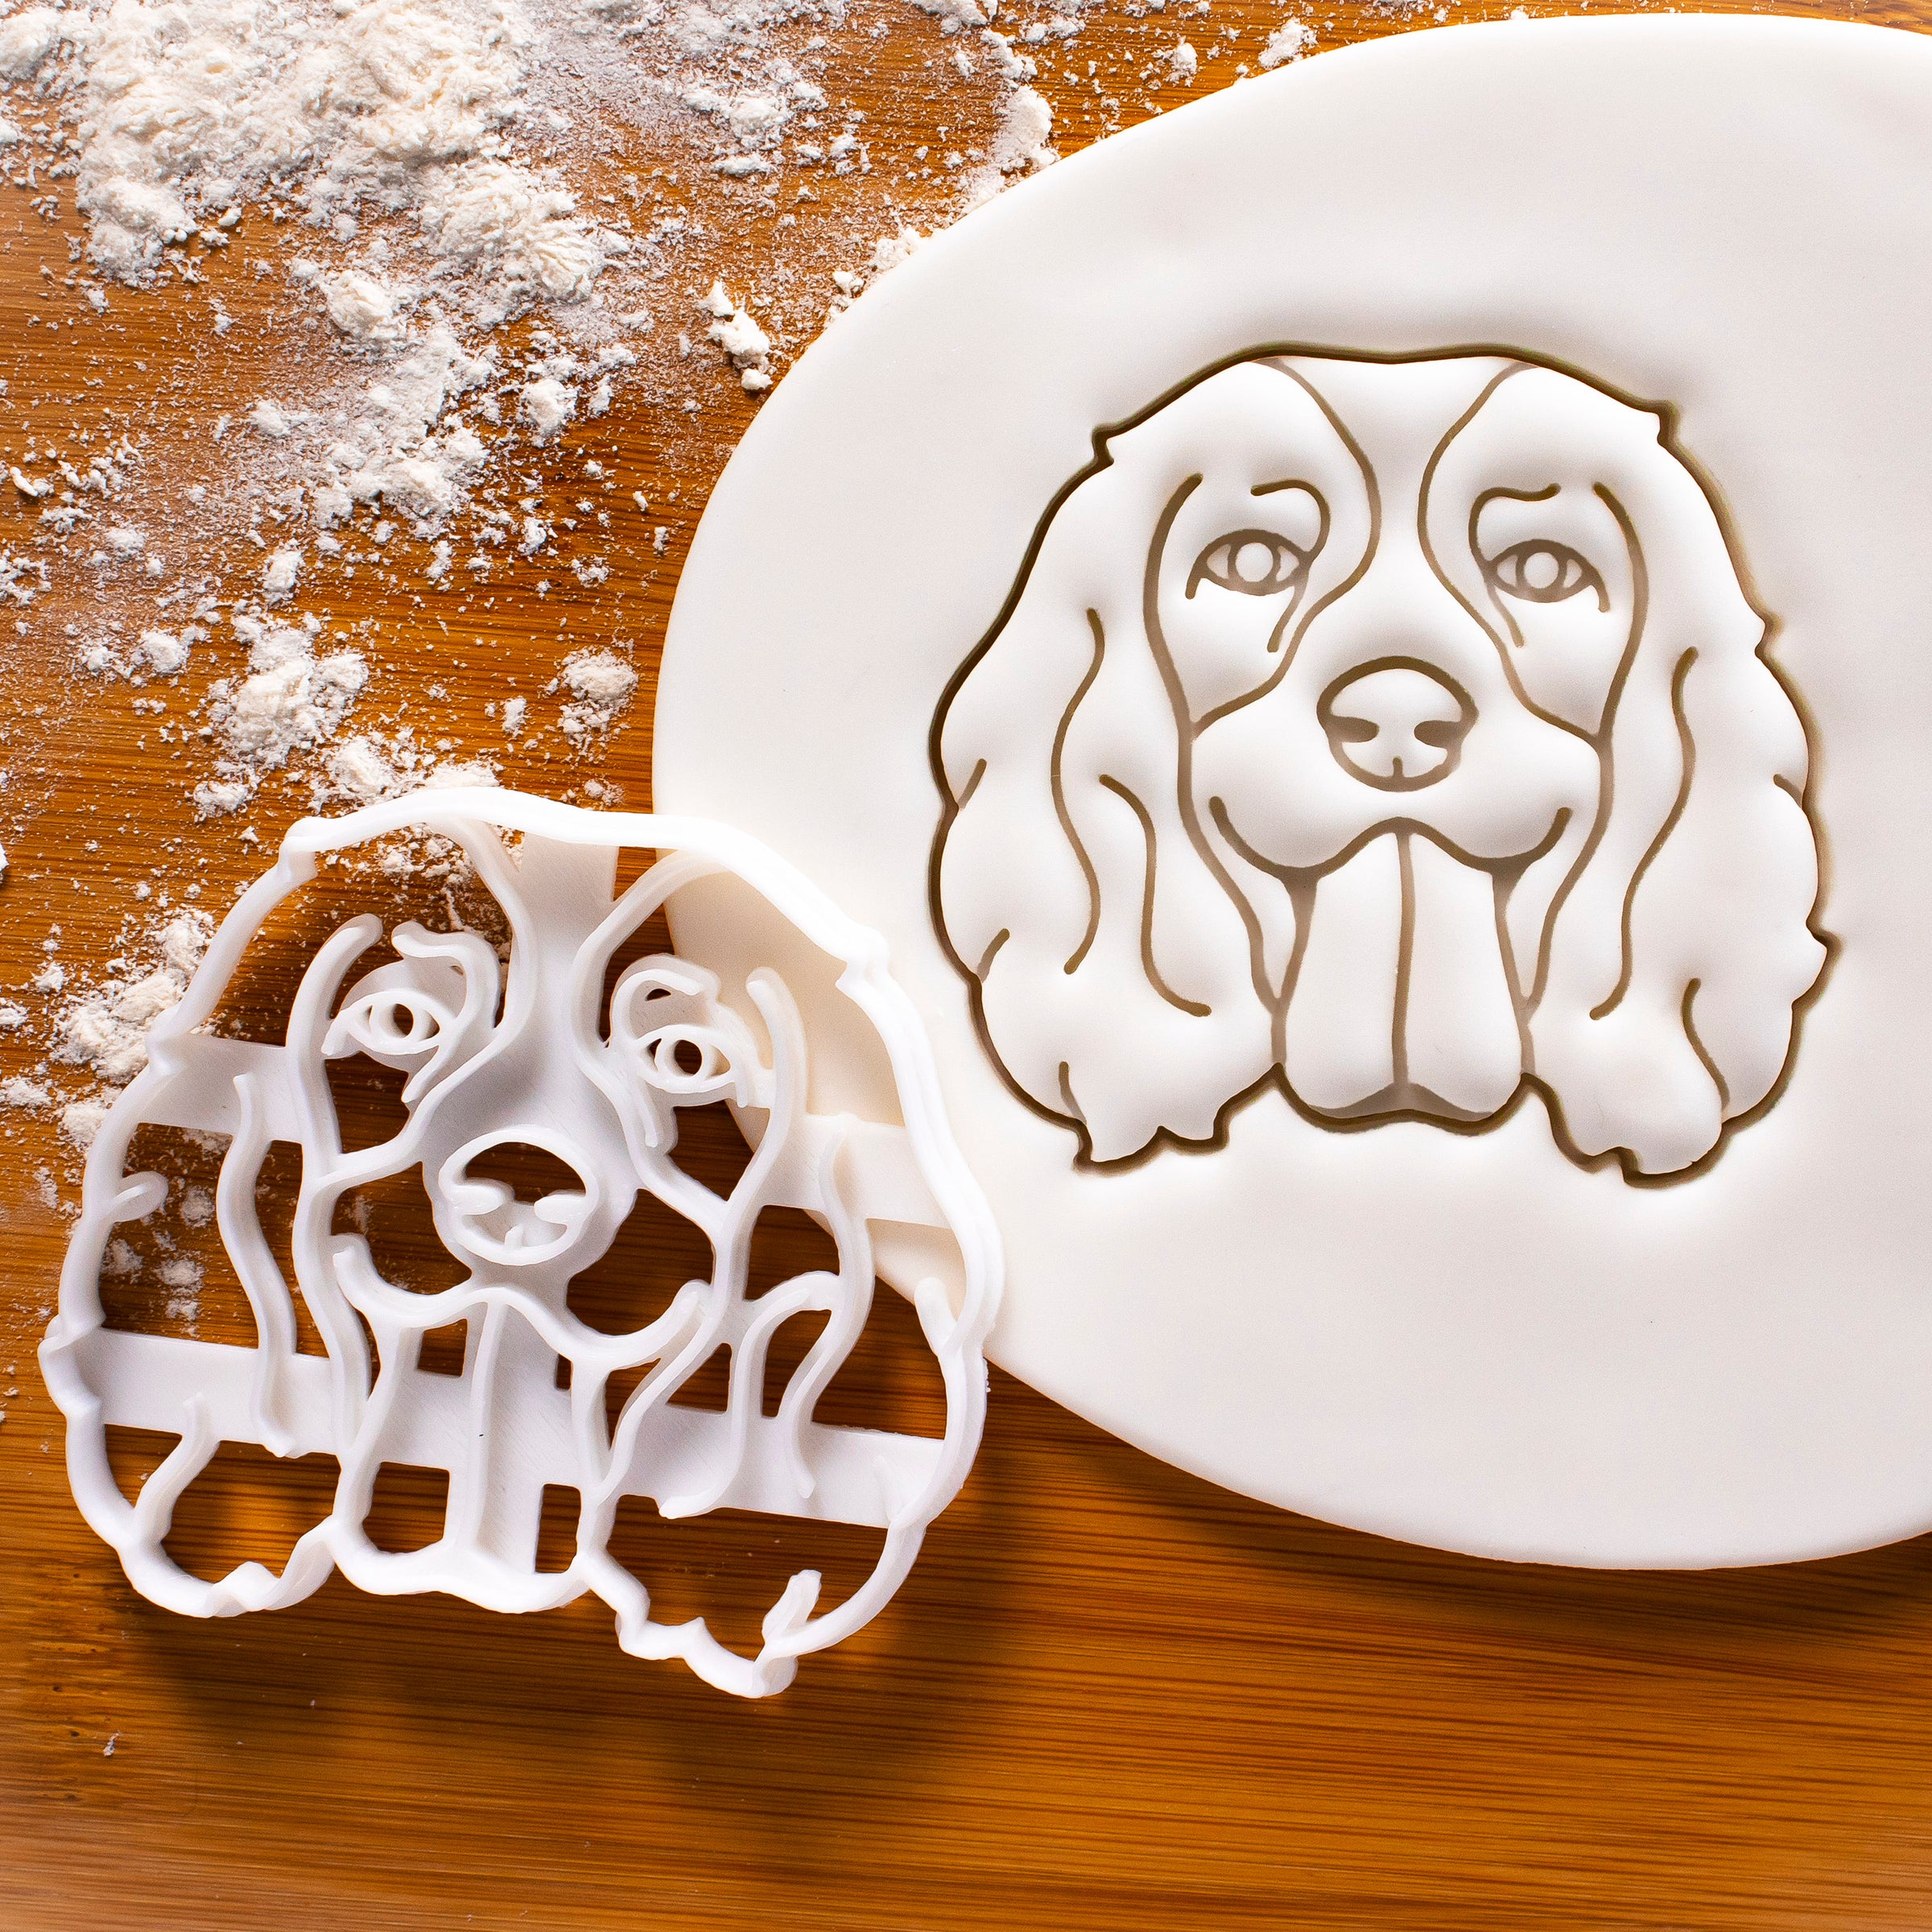 English Springer Spaniel Face Cookie Cutter